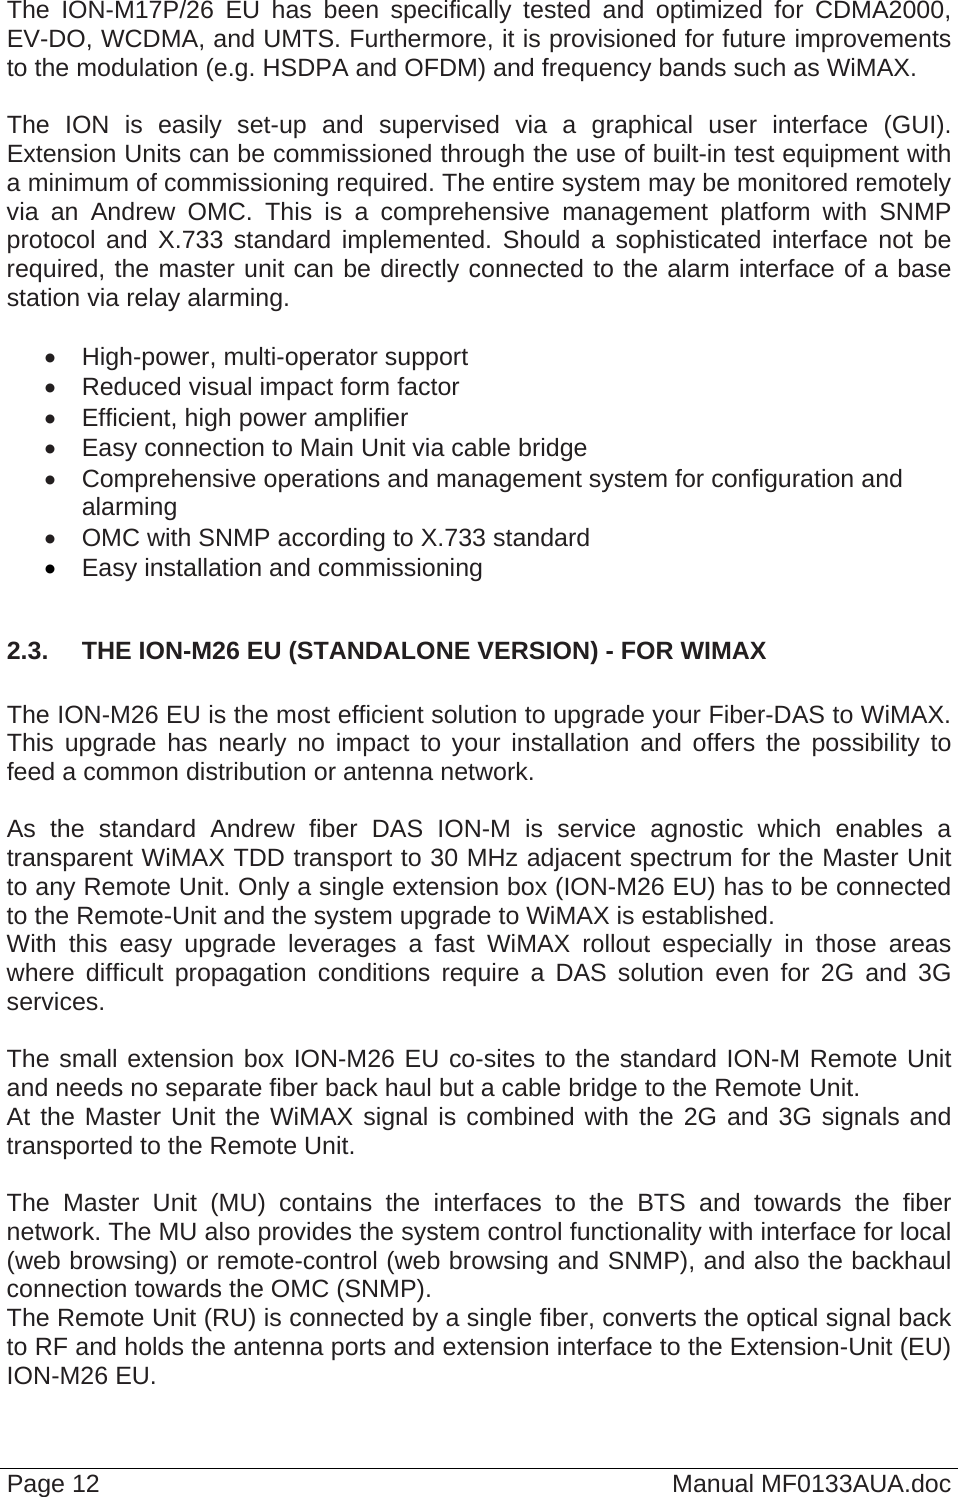  Page 12  Manual MF0133AUA.doc The ION-M17P/26 EU has been specifically tested and optimized for CDMA2000, EV-DO, WCDMA, and UMTS. Furthermore, it is provisioned for future improvements to the modulation (e.g. HSDPA and OFDM) and frequency bands such as WiMAX.   The ION is easily set-up and supervised via a graphical user interface (GUI). Extension Units can be commissioned through the use of built-in test equipment with a minimum of commissioning required. The entire system may be monitored remotely via an Andrew OMC. This is a comprehensive management platform with SNMP protocol and X.733 standard implemented. Should a sophisticated interface not be required, the master unit can be directly connected to the alarm interface of a base station via relay alarming.    High-power, multi-operator support   Reduced visual impact form factor   Efficient, high power amplifier   Easy connection to Main Unit via cable bridge   Comprehensive operations and management system for configuration and alarming   OMC with SNMP according to X.733 standard  Easy installation and commissioning  2.3.  THE ION-M26 EU (STANDALONE VERSION) - FOR WIMAX  The ION-M26 EU is the most efficient solution to upgrade your Fiber-DAS to WiMAX. This upgrade has nearly no impact to your installation and offers the possibility to feed a common distribution or antenna network.  As the standard Andrew fiber DAS ION-M is service agnostic which enables a transparent WiMAX TDD transport to 30 MHz adjacent spectrum for the Master Unit to any Remote Unit. Only a single extension box (ION-M26 EU) has to be connected to the Remote-Unit and the system upgrade to WiMAX is established. With this easy upgrade leverages a fast WiMAX rollout especially in those areas where difficult propagation conditions require a DAS solution even for 2G and 3G services.  The small extension box ION-M26 EU co-sites to the standard ION-M Remote Unit and needs no separate fiber back haul but a cable bridge to the Remote Unit. At the Master Unit the WiMAX signal is combined with the 2G and 3G signals and transported to the Remote Unit.  The Master Unit (MU) contains the interfaces to the BTS and towards the fiber network. The MU also provides the system control functionality with interface for local (web browsing) or remote-control (web browsing and SNMP), and also the backhaul connection towards the OMC (SNMP). The Remote Unit (RU) is connected by a single fiber, converts the optical signal back to RF and holds the antenna ports and extension interface to the Extension-Unit (EU) ION-M26 EU. 